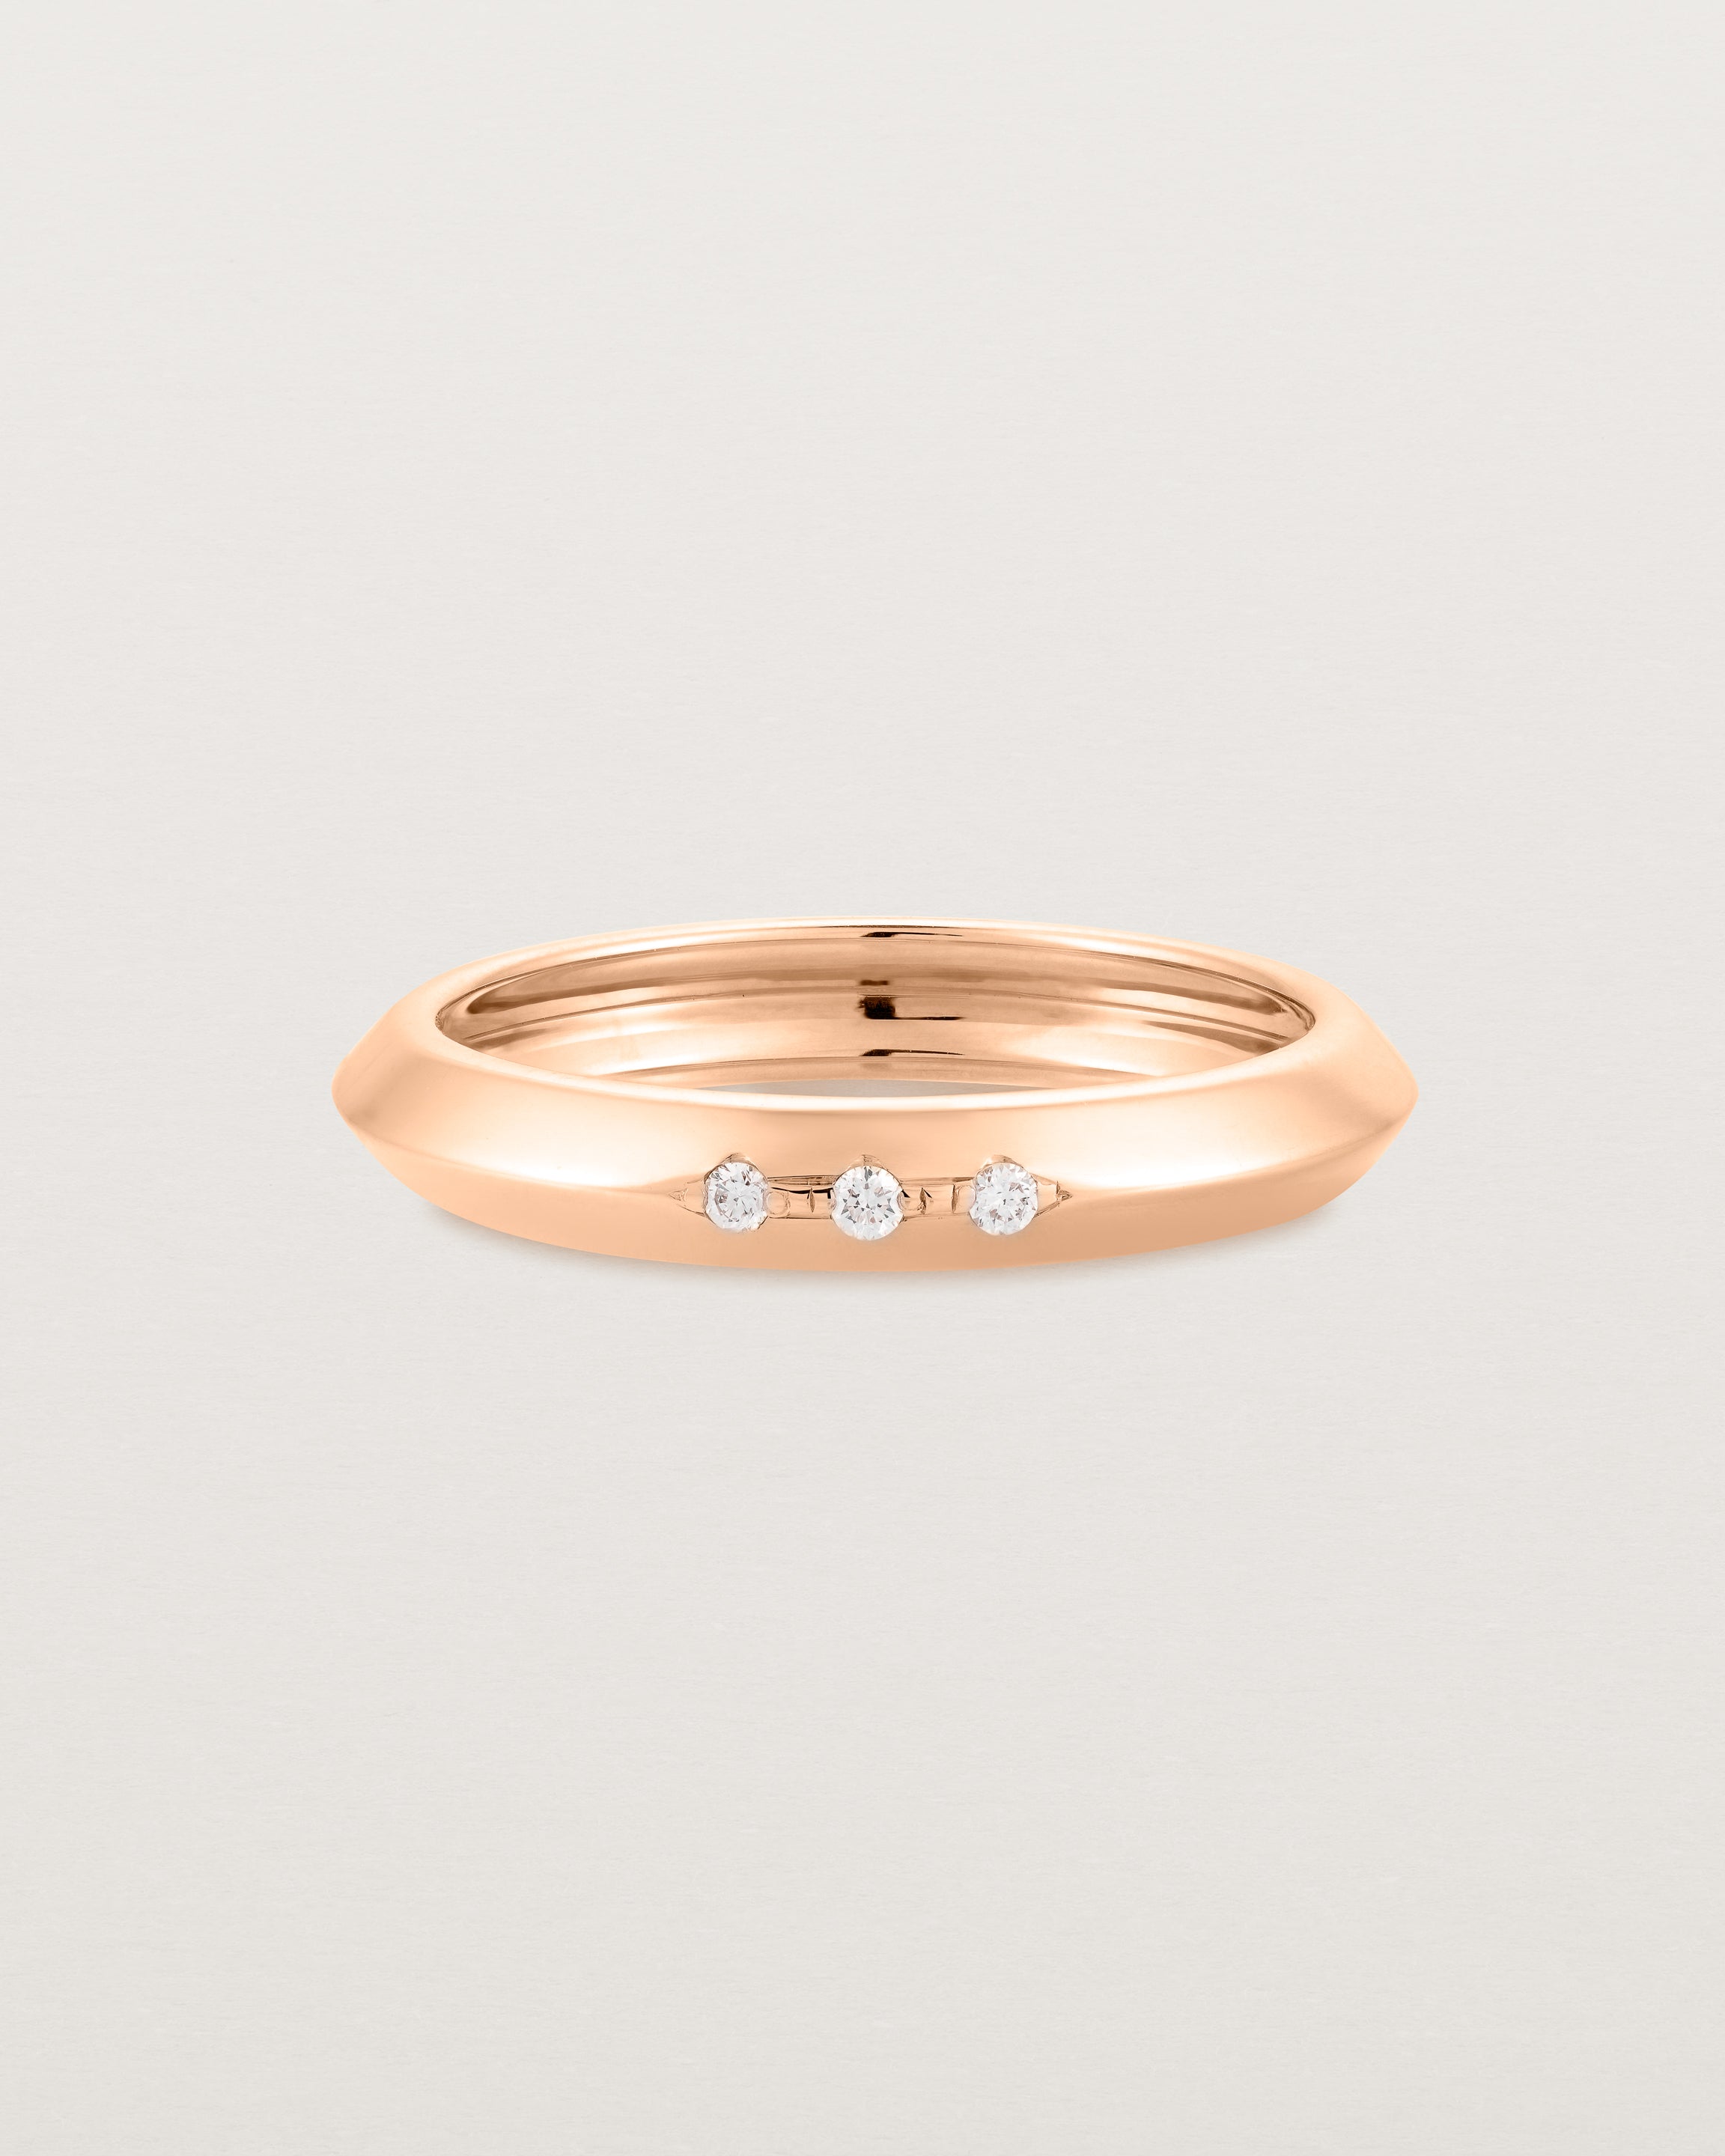 A rose gold ring with white diamonds